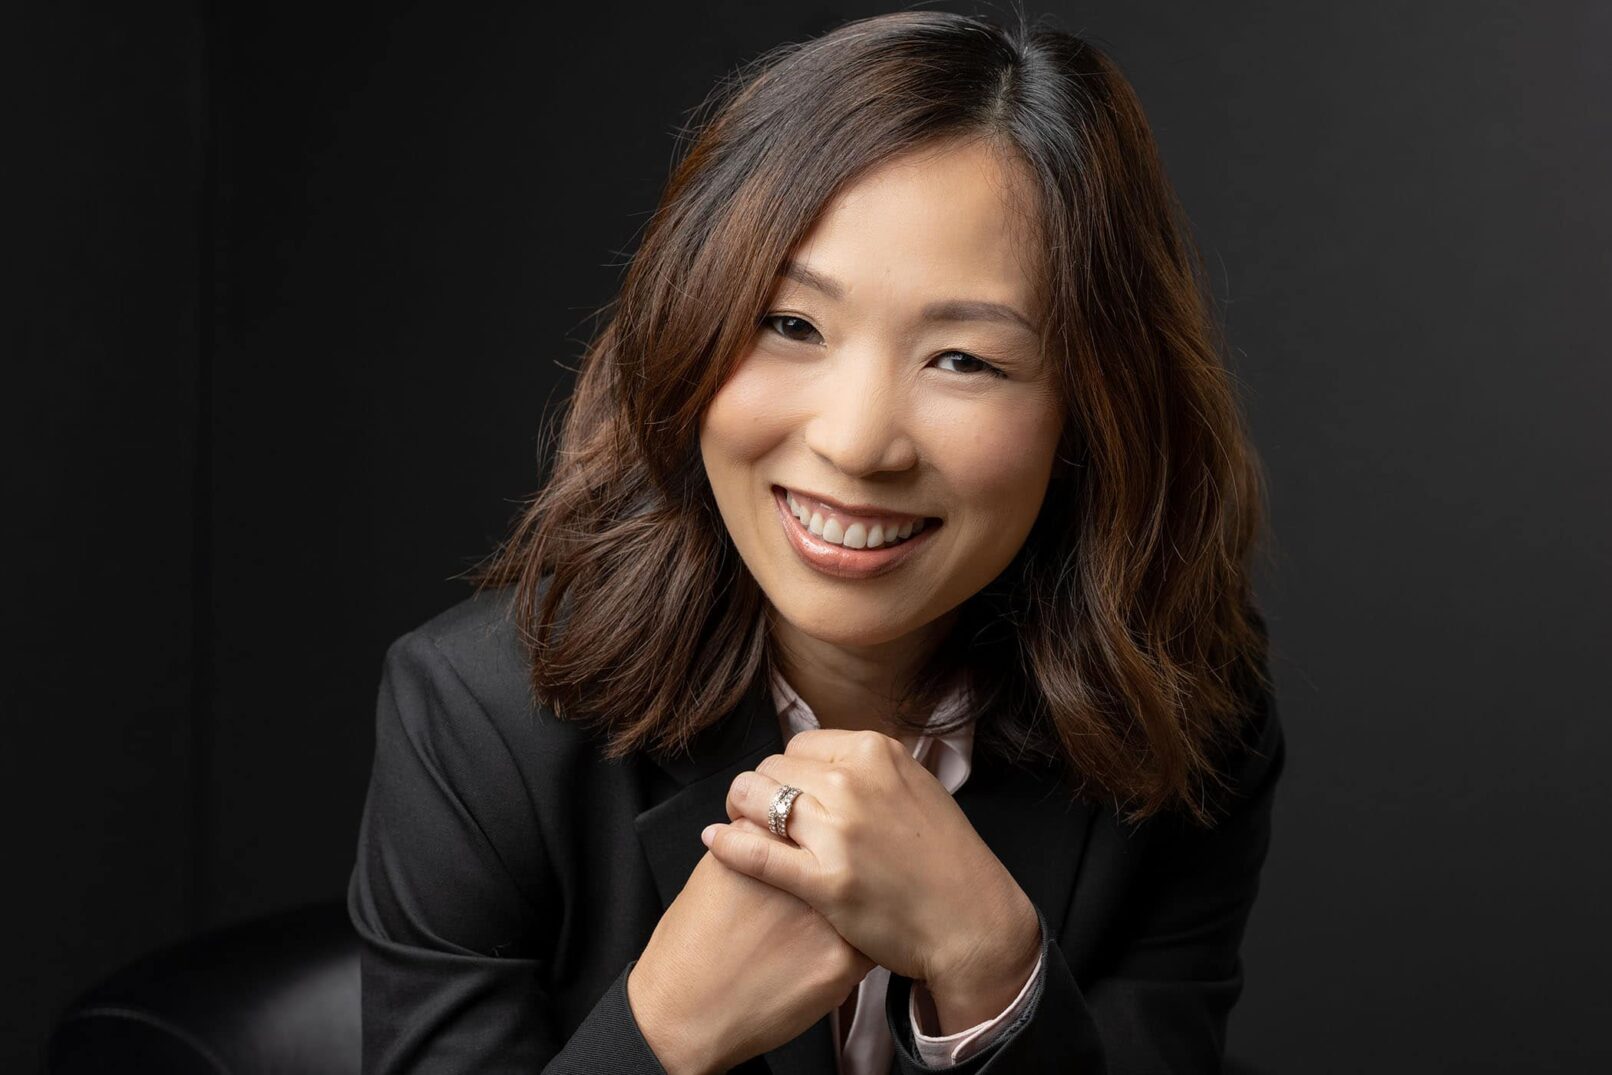 Woman wearing a suit, posing for headshot photo.